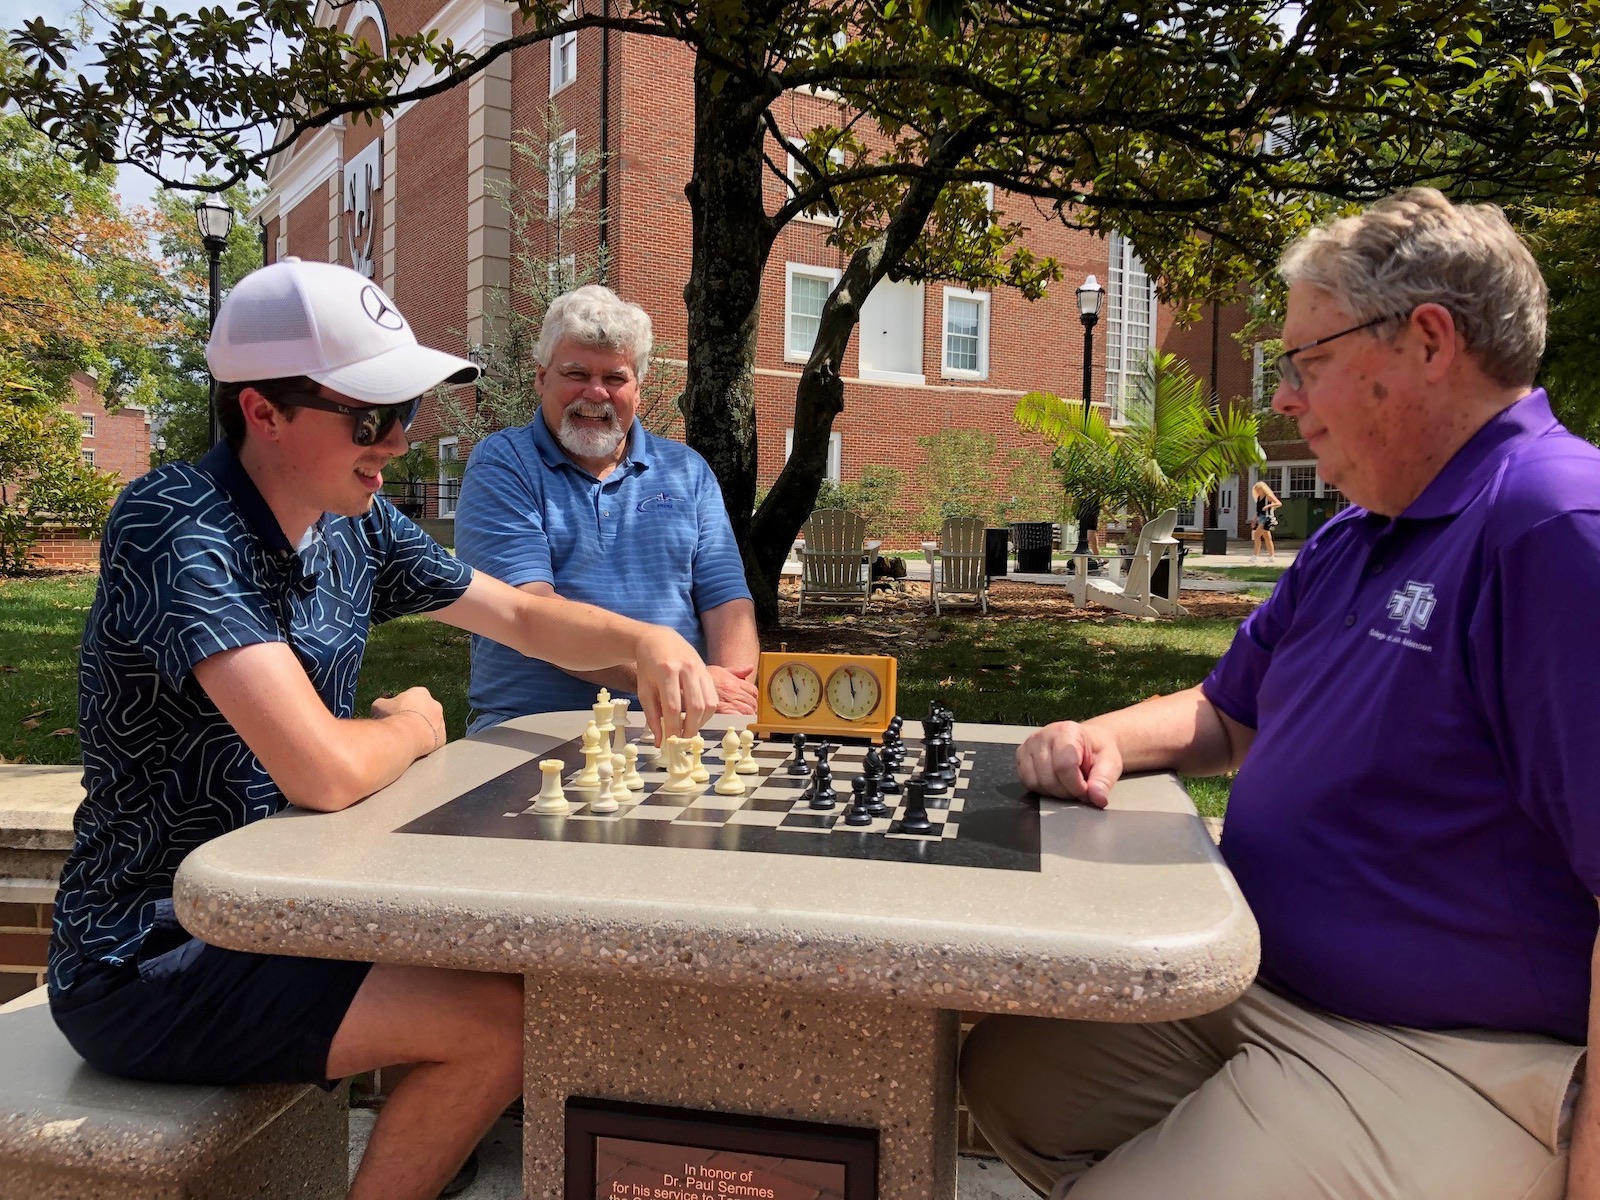  Tennessee Tech Chess Club President Austin Jerrolds, left, and retired Arts and Sciences Dean Paul Semmes, right, compete in a friendly match at the newly dedicated chess table outside Henderson Hall as Interim Dean Jeff Roberts provides encouragement. 